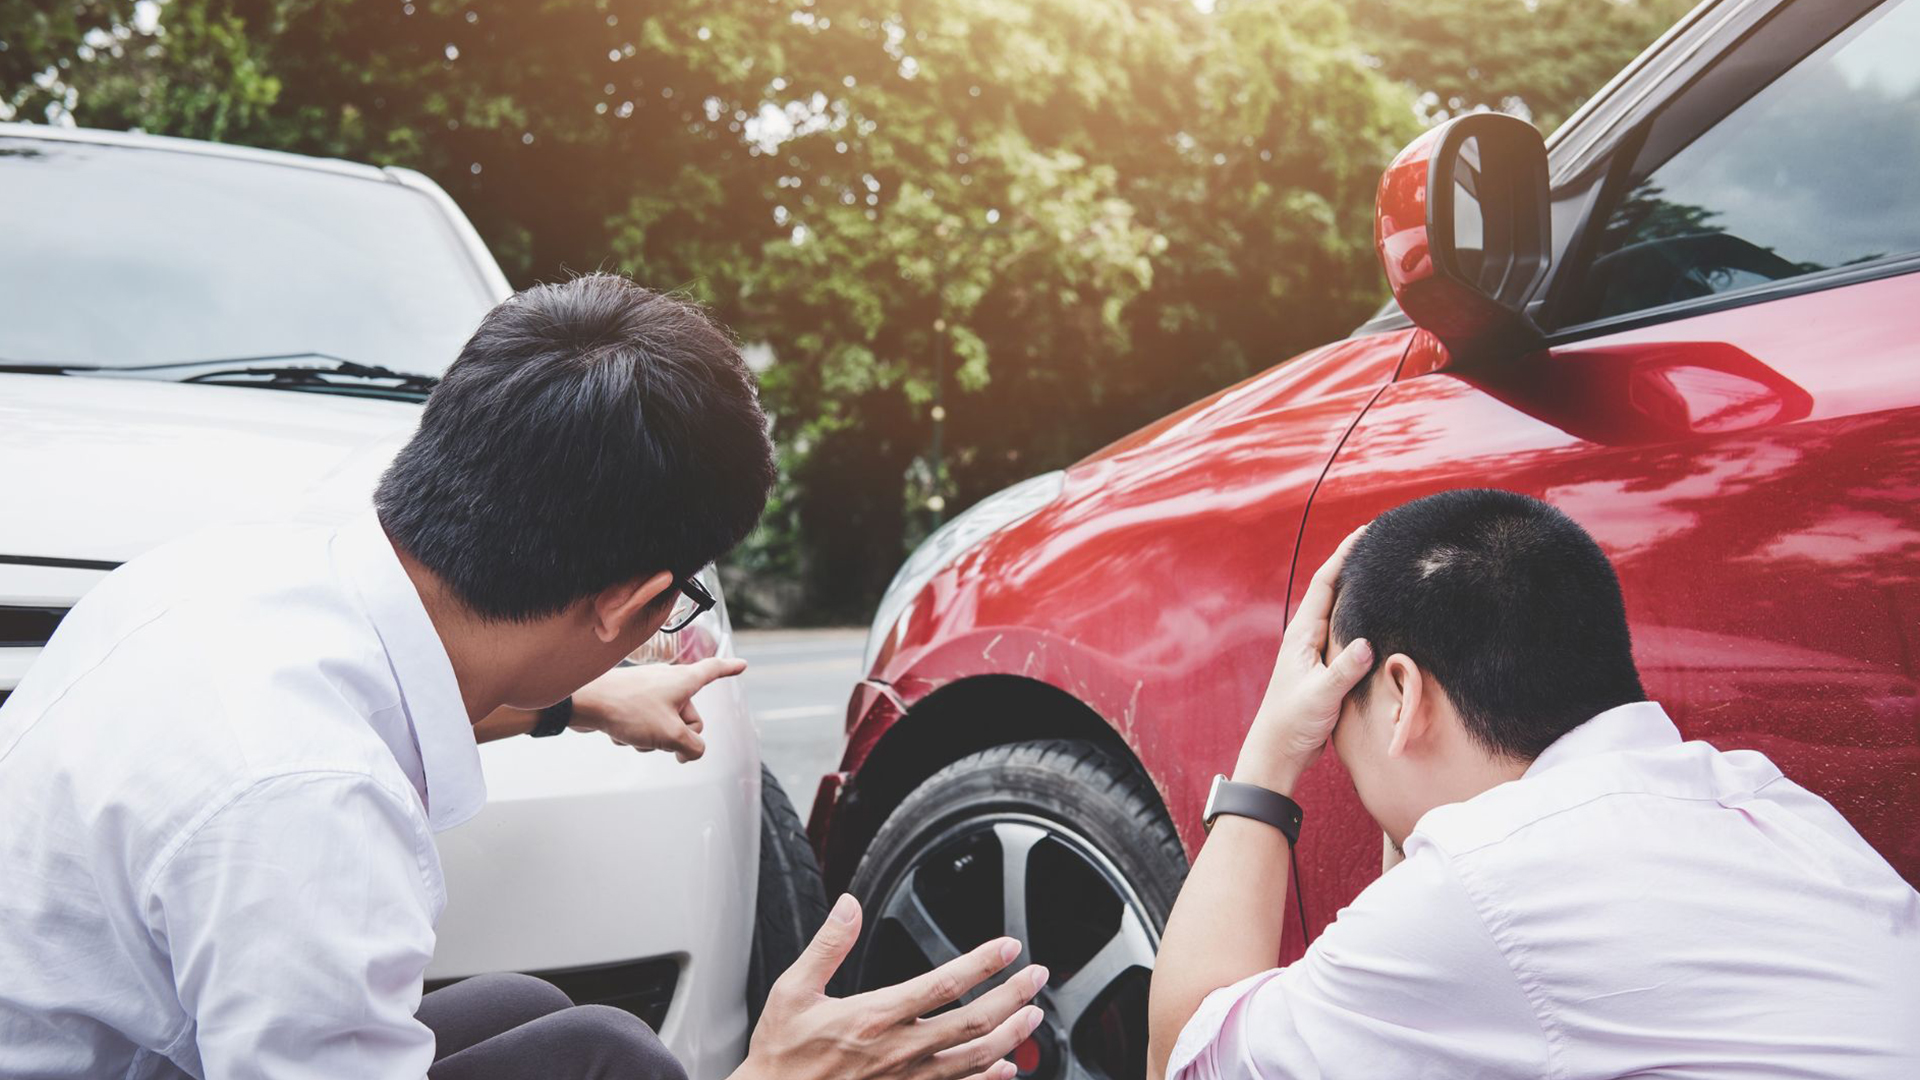 Should I Get a Lawyer for a Minor Car Accident?